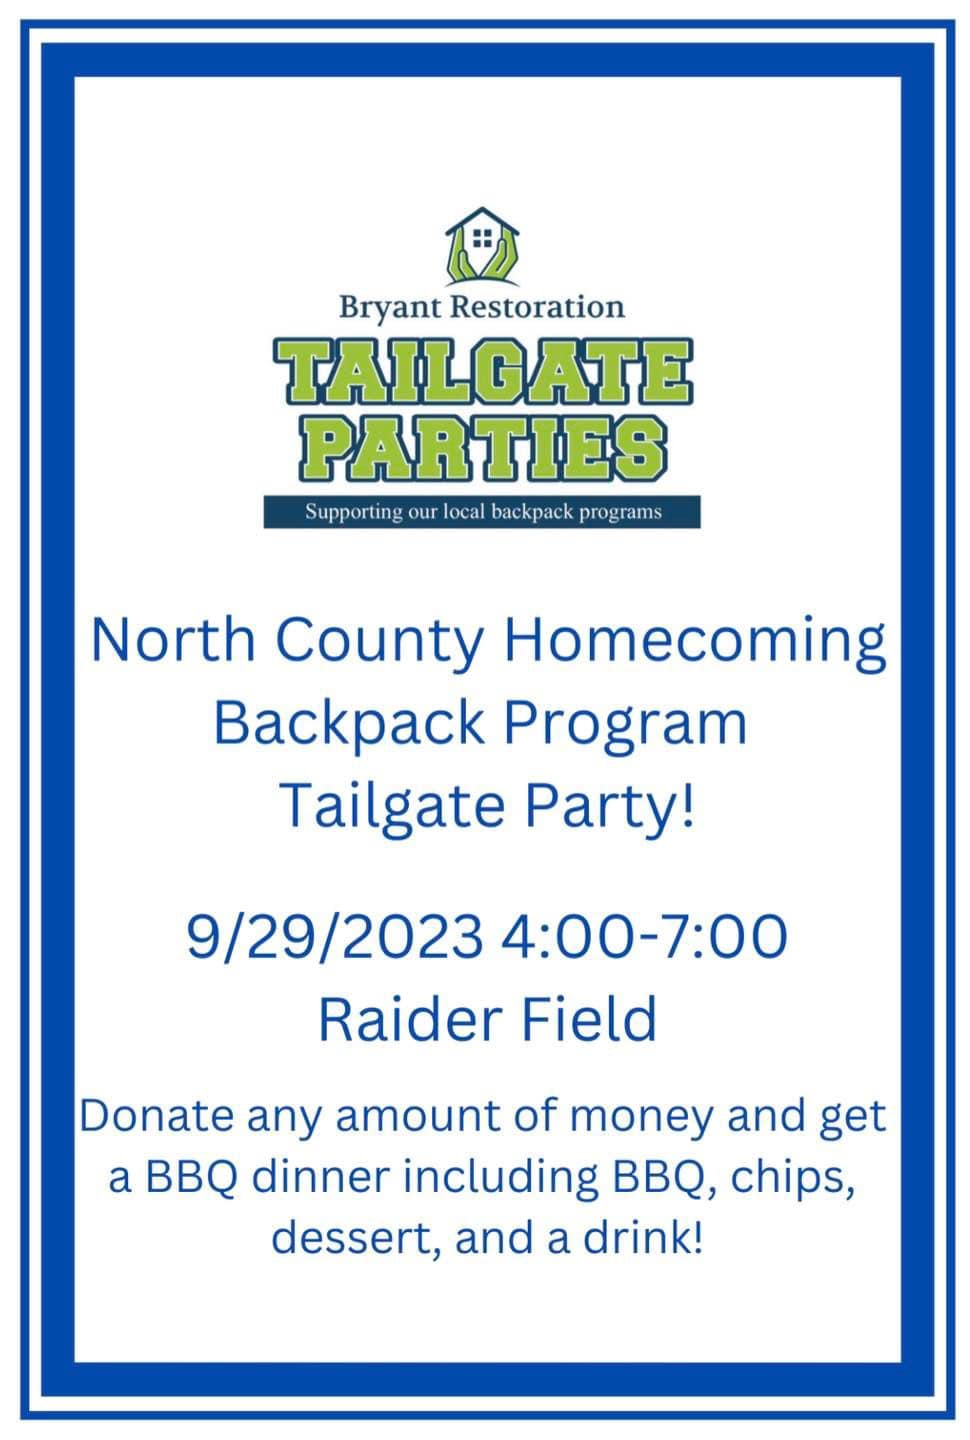 North County Tailgate for Back Pack